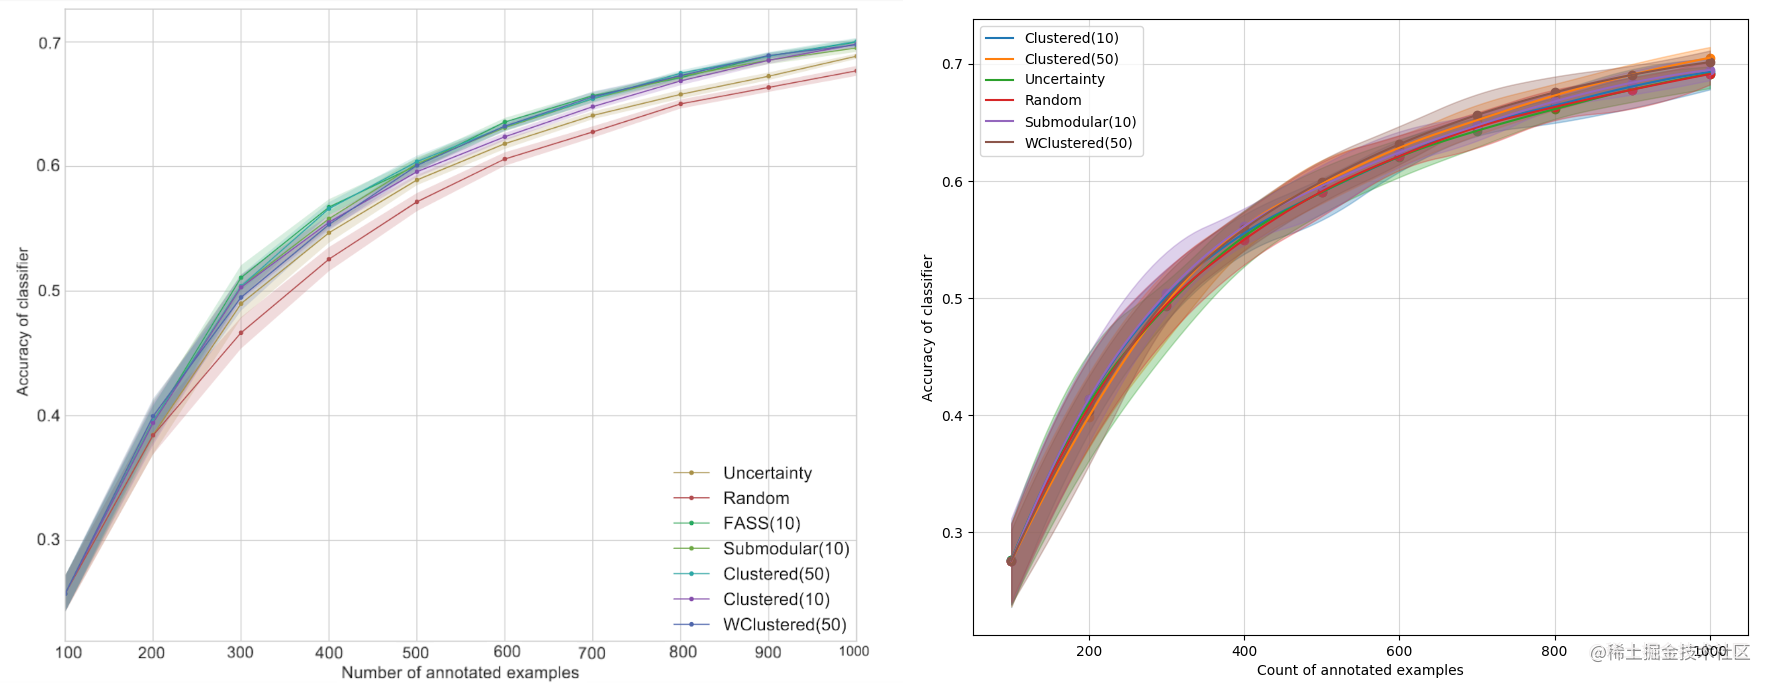 Figure 2. Results of the original paper (left) and our experiment (right) on the 20 Newsgroups dataset. The performance measure is accuracy, the solid line is the average over 20 runs, and the confidence intervals are 10th and 90th percentiles.